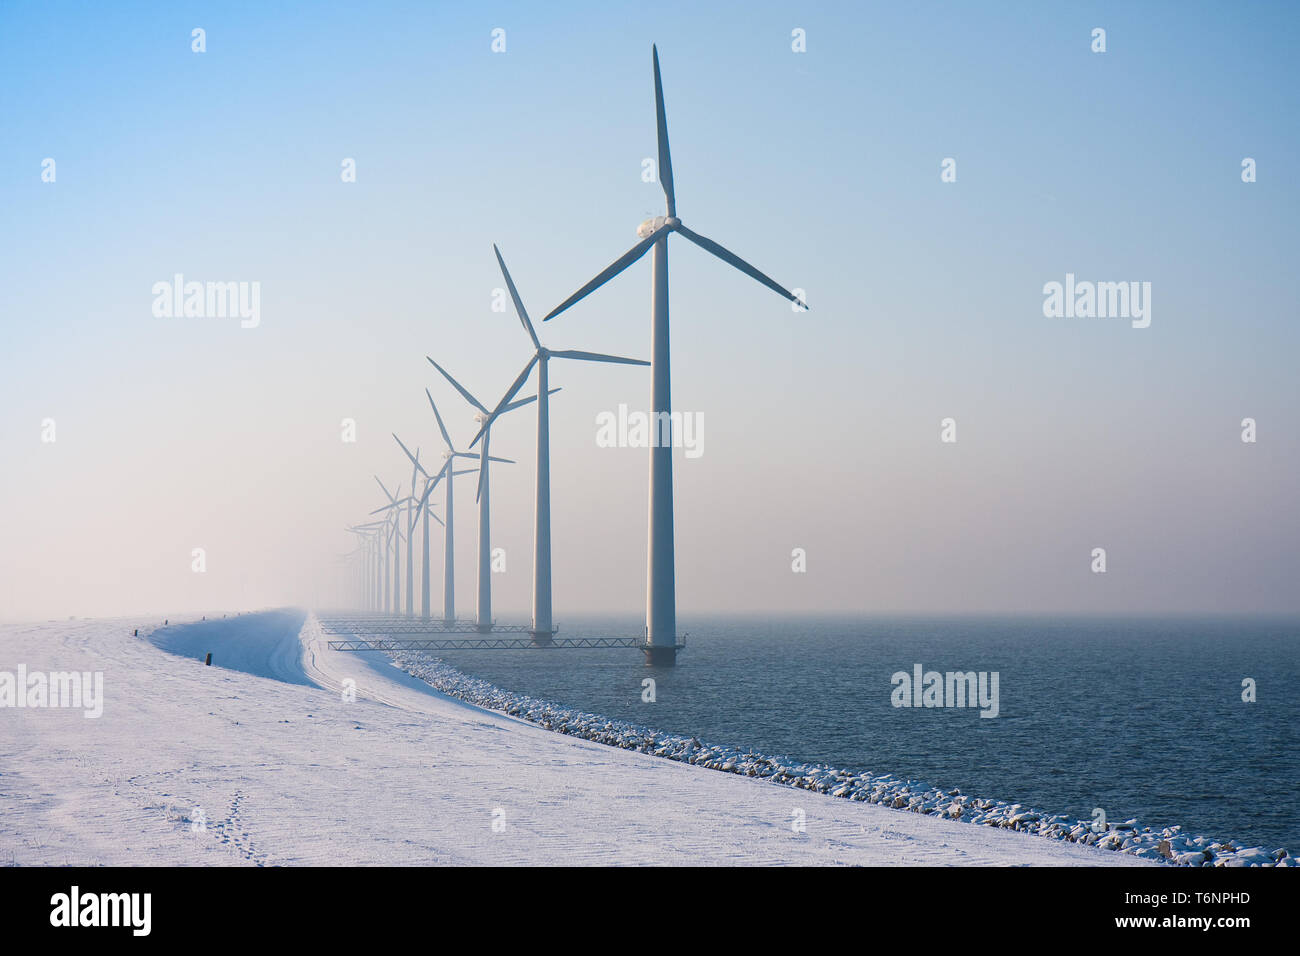 Row of Dutch windmills disappearing in winter haze Stock Photo